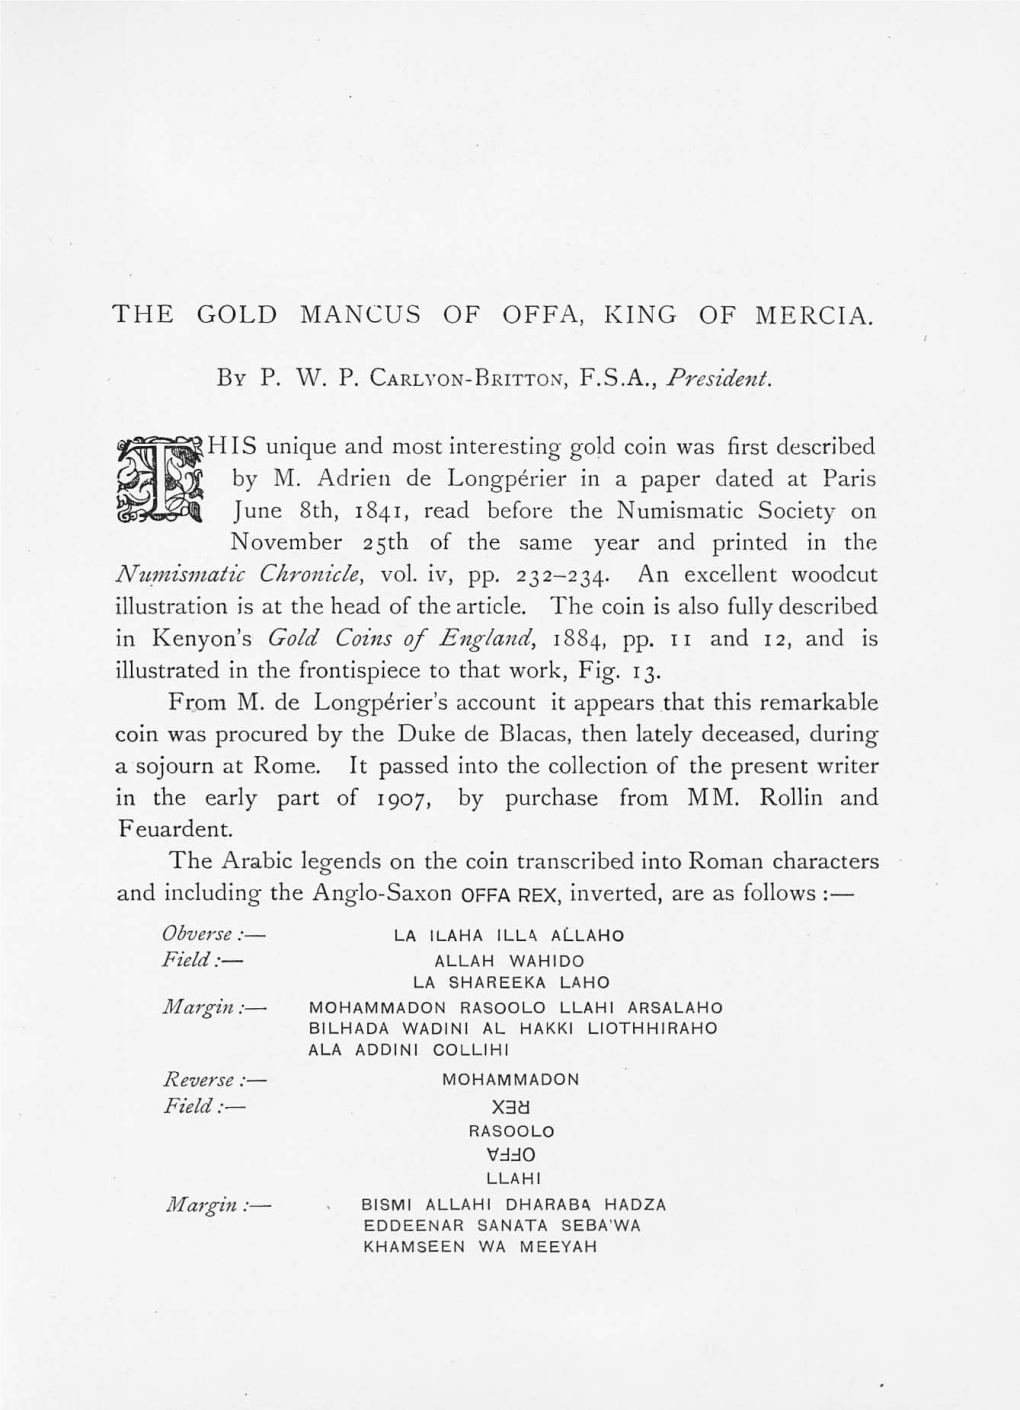 A Gold Mancus of Offa, King of Mercia